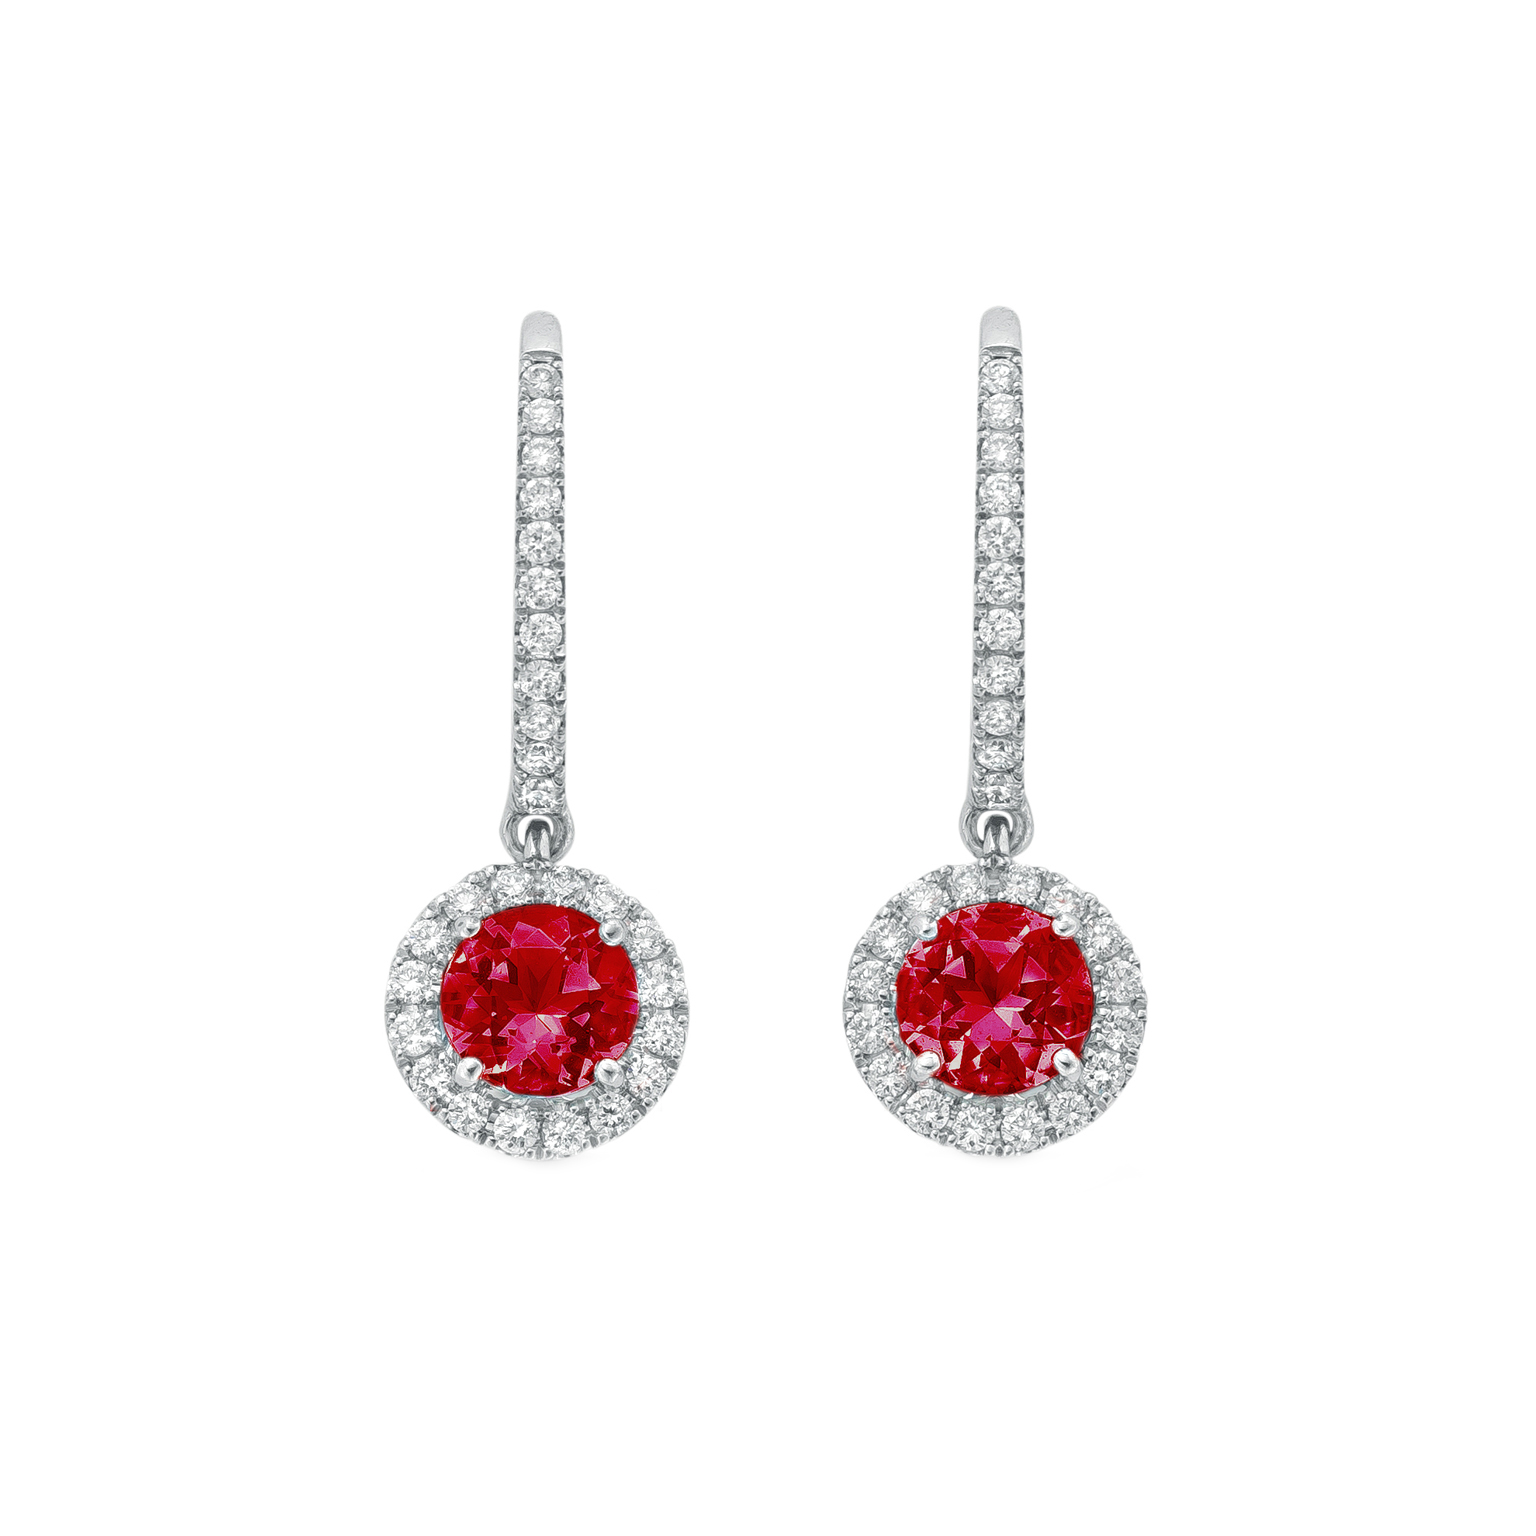 The best red gemstone fine jewellery for Valentines Day 2018